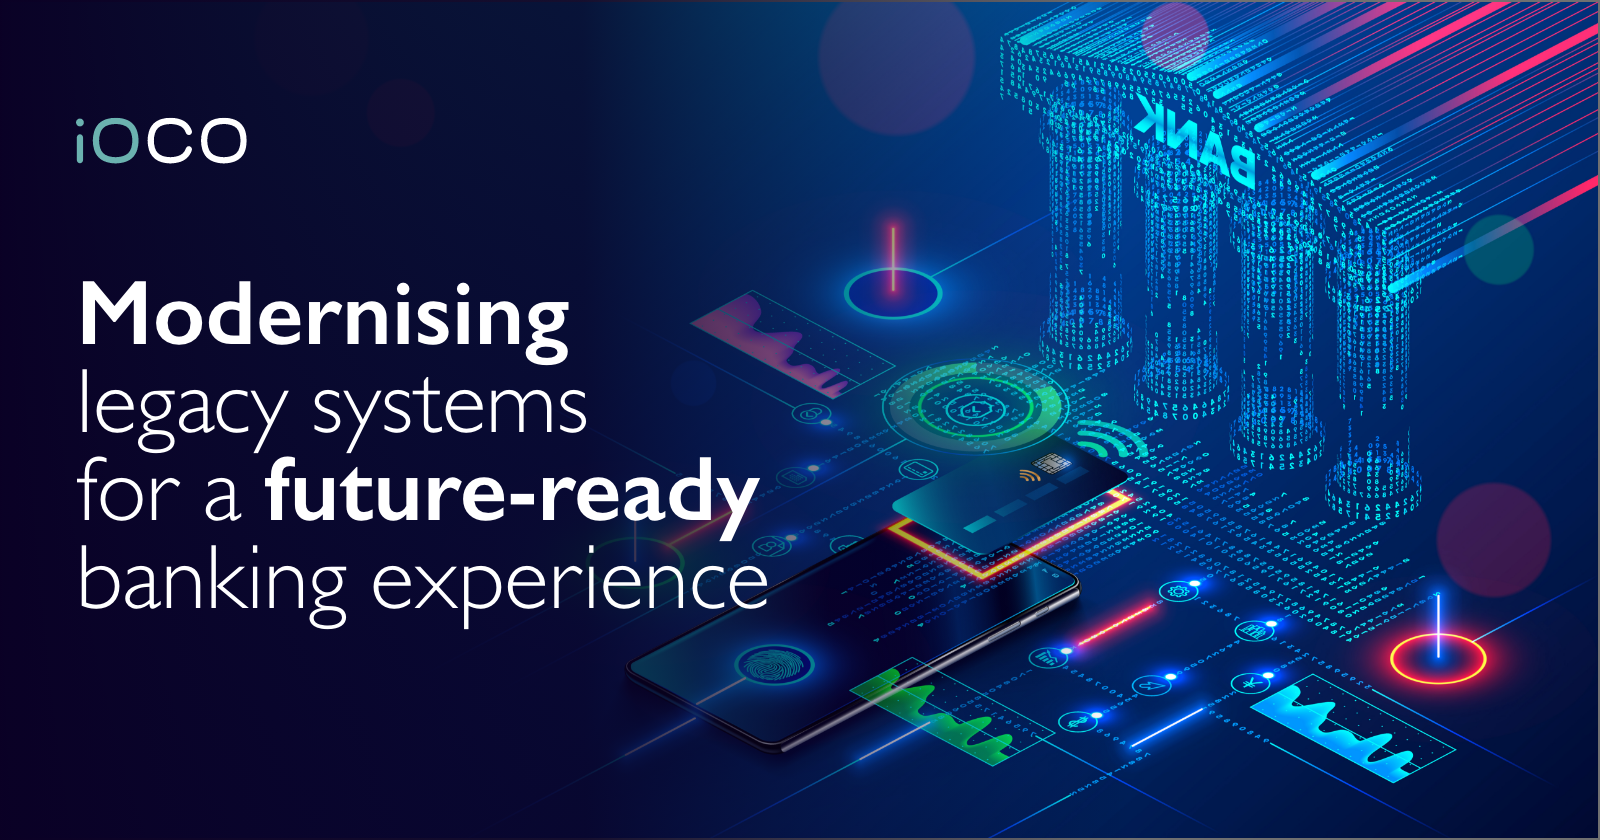 Modernising legacy systems for a future-ready banking experience